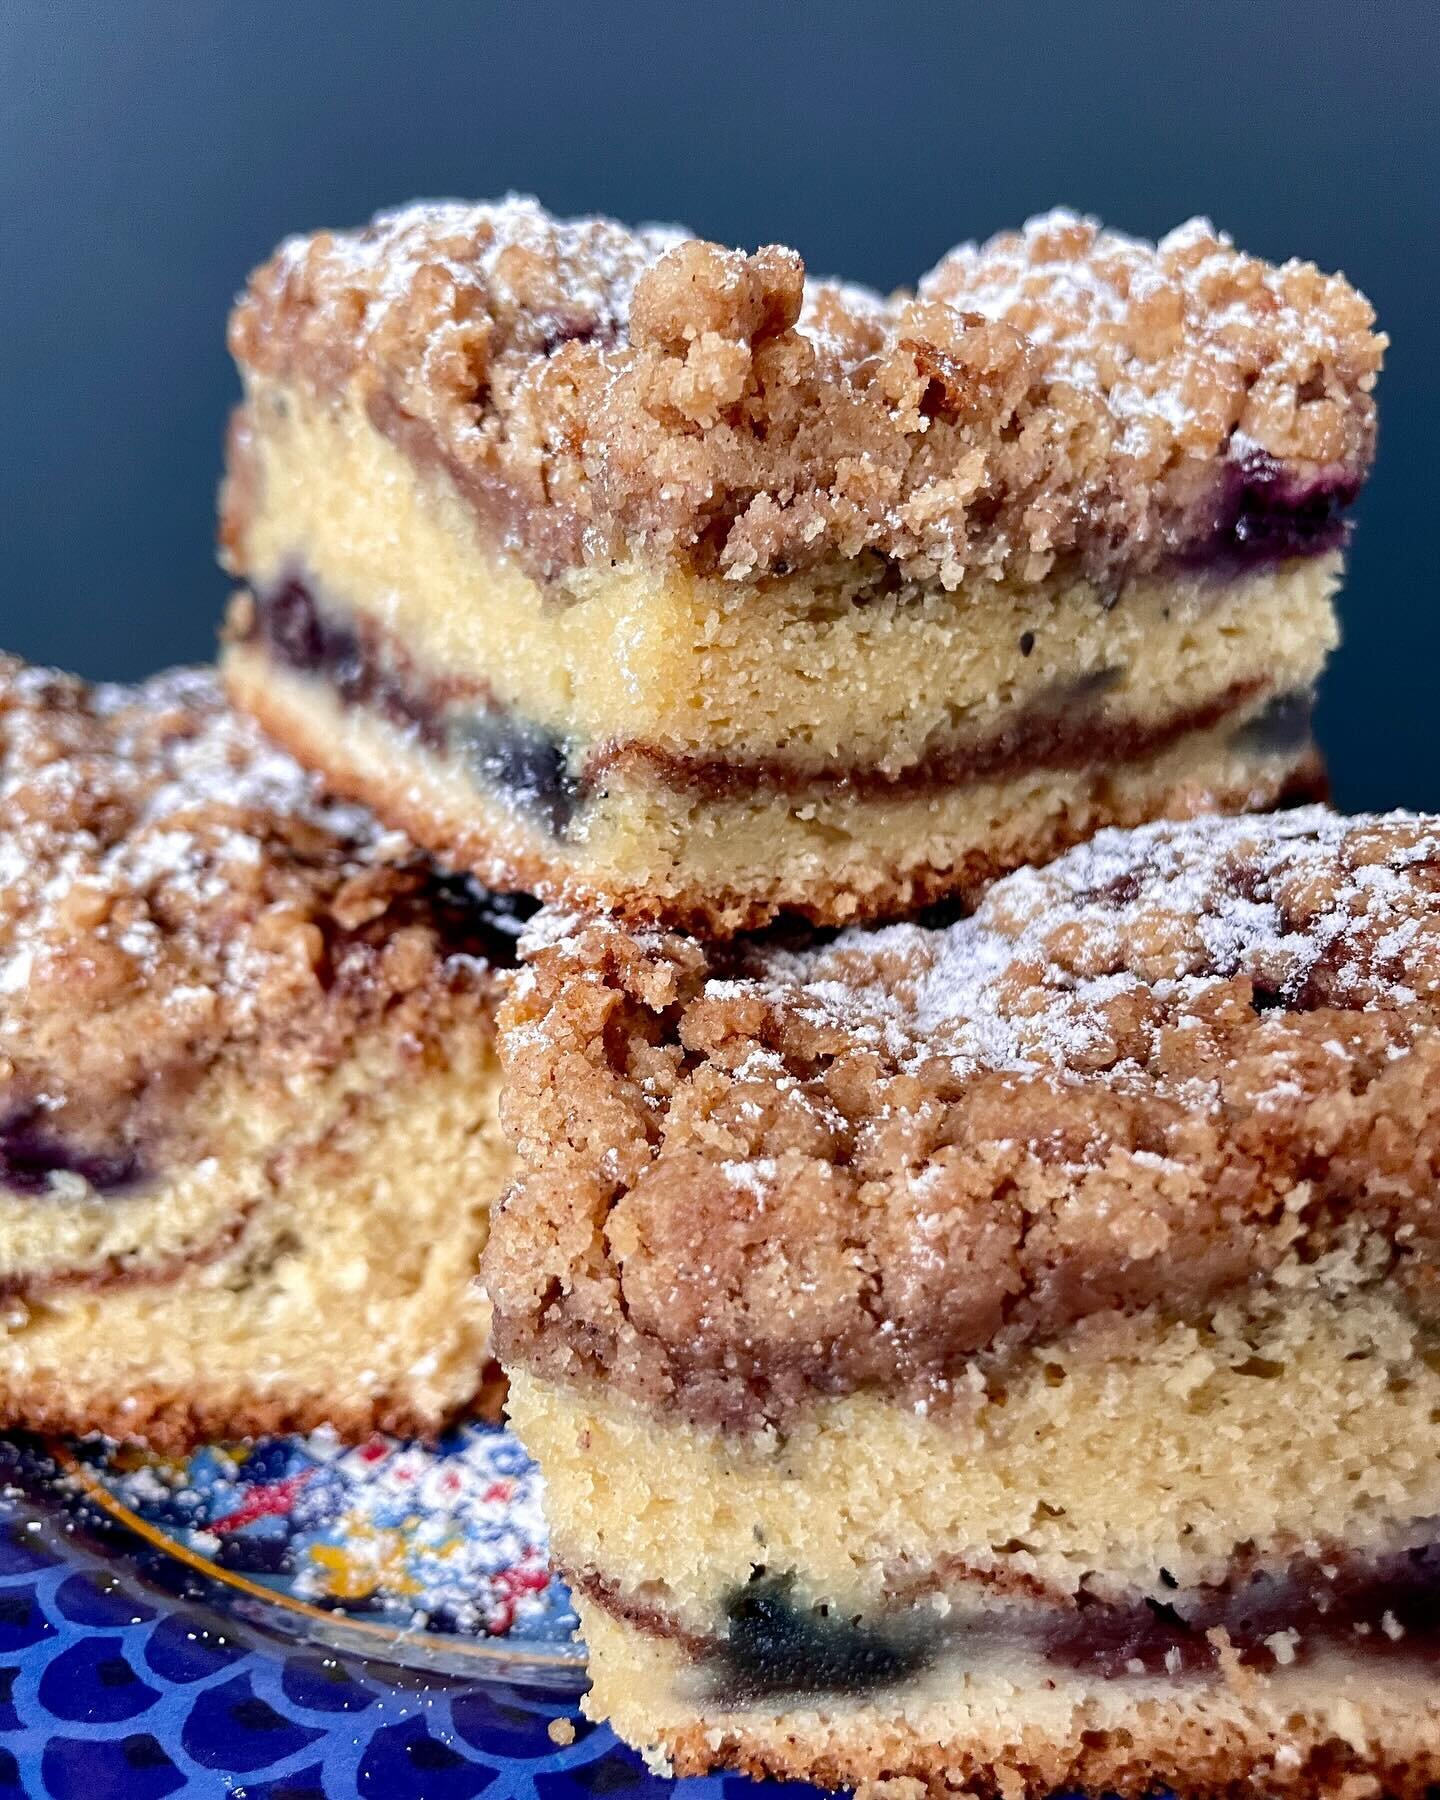 Send those Sunday Blues away and tuck into a slice of 🫐Blueberry Coffee Cake🫐 After all it&rsquo;s #nationalcoffeecakeday ☕️🍰

Today only ✨ 9AM until we run out ✨ Our classic ☕️ Coffee Coffee Cake will be available as well!